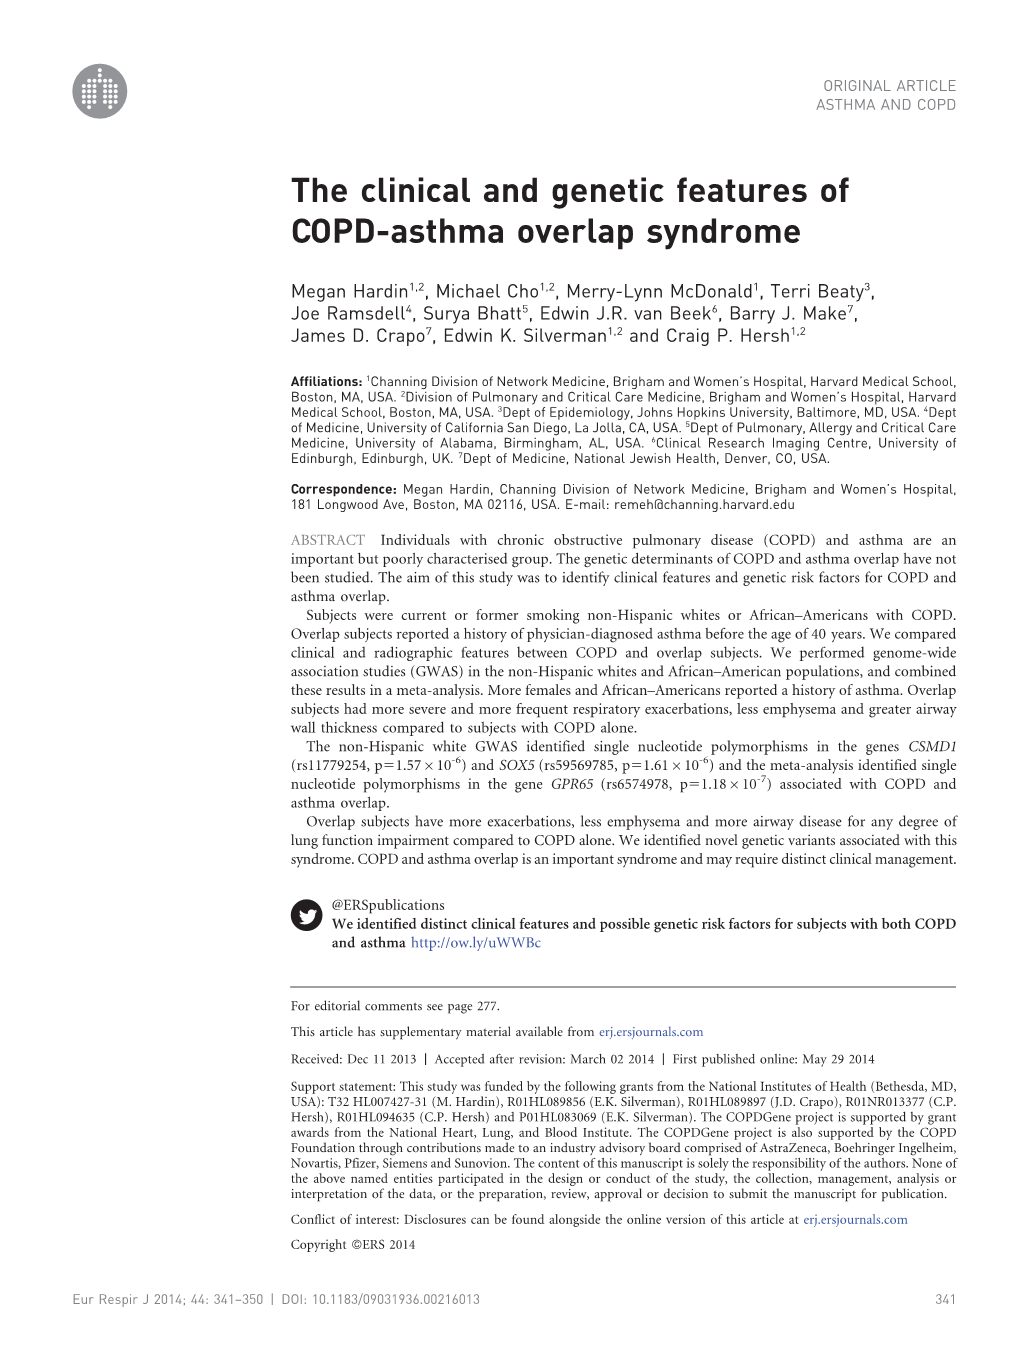 The Clinical and Genetic Features of COPD-Asthma Overlap Syndrome